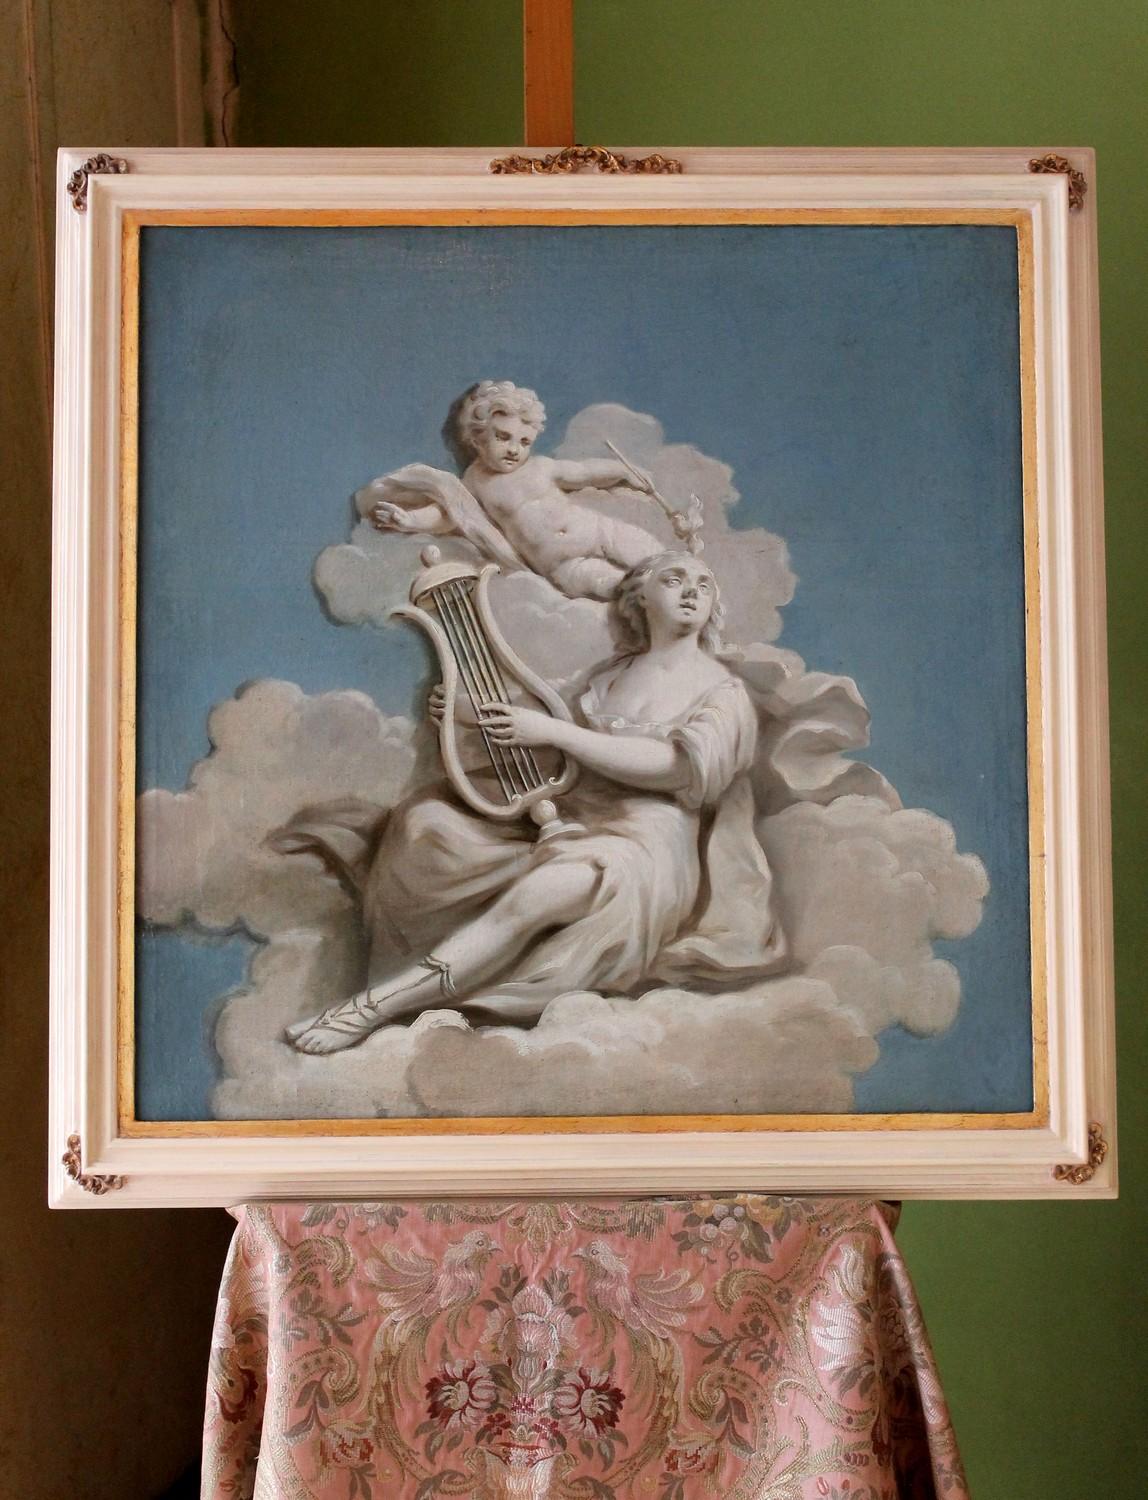 This romantic French 19th century allegoric oil painting on square canvas has a sky blue background, a fluffy cloud fills the central part of the painting where a woman is lying down playing the lyre, while a graceful cherub seems to twirl over